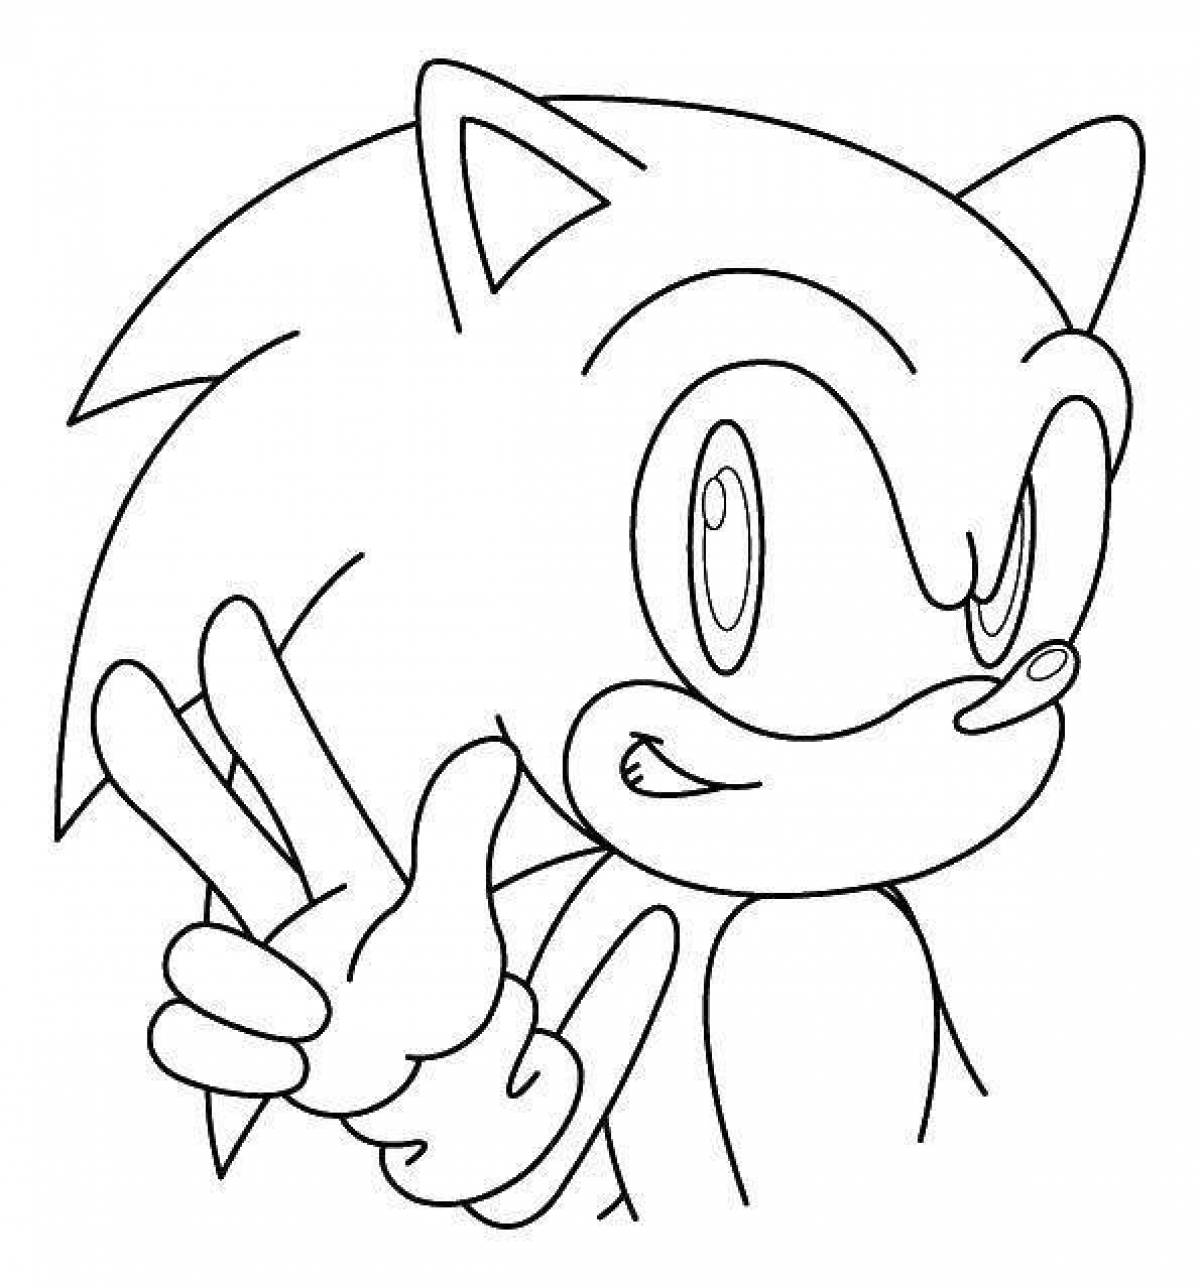 Sonic x z glowing coloring book